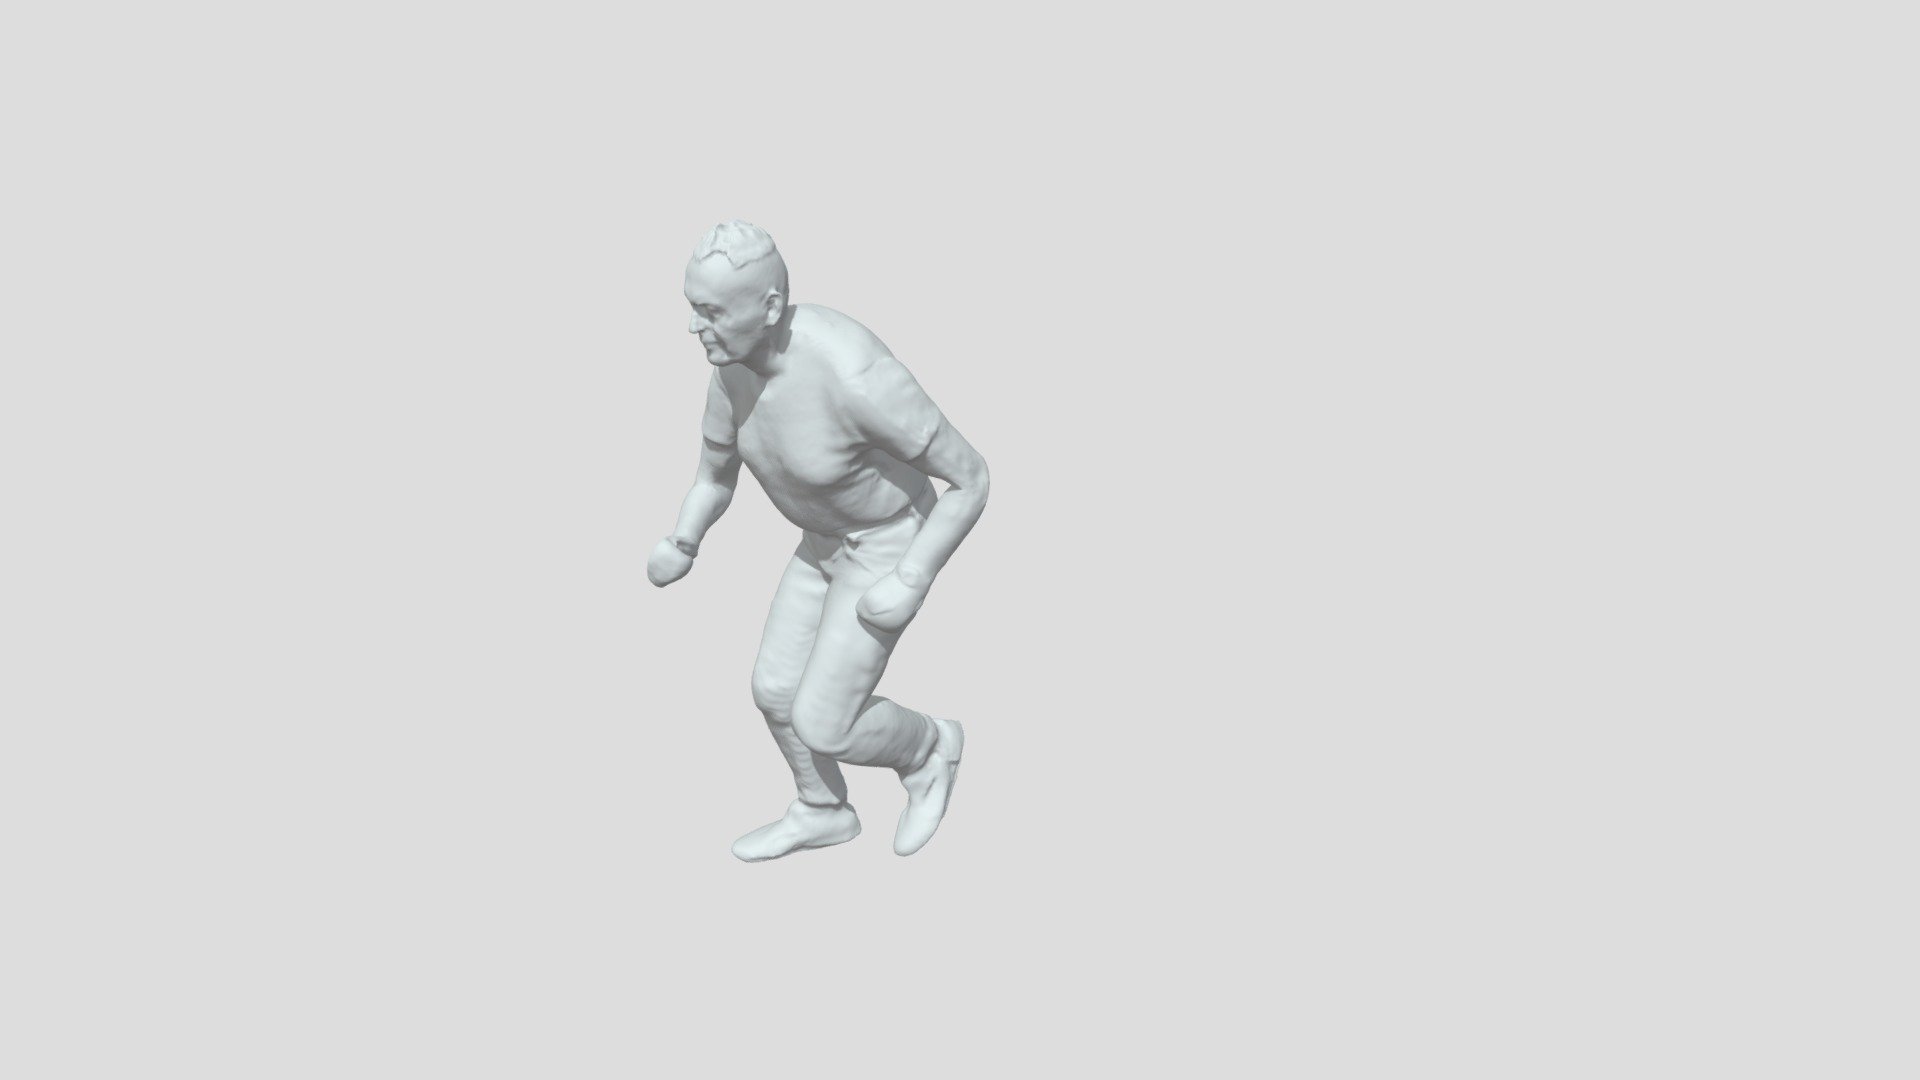 Luis_Running Up Stairs - 3D model by cemeier [d9ccddb] - Sketchfab